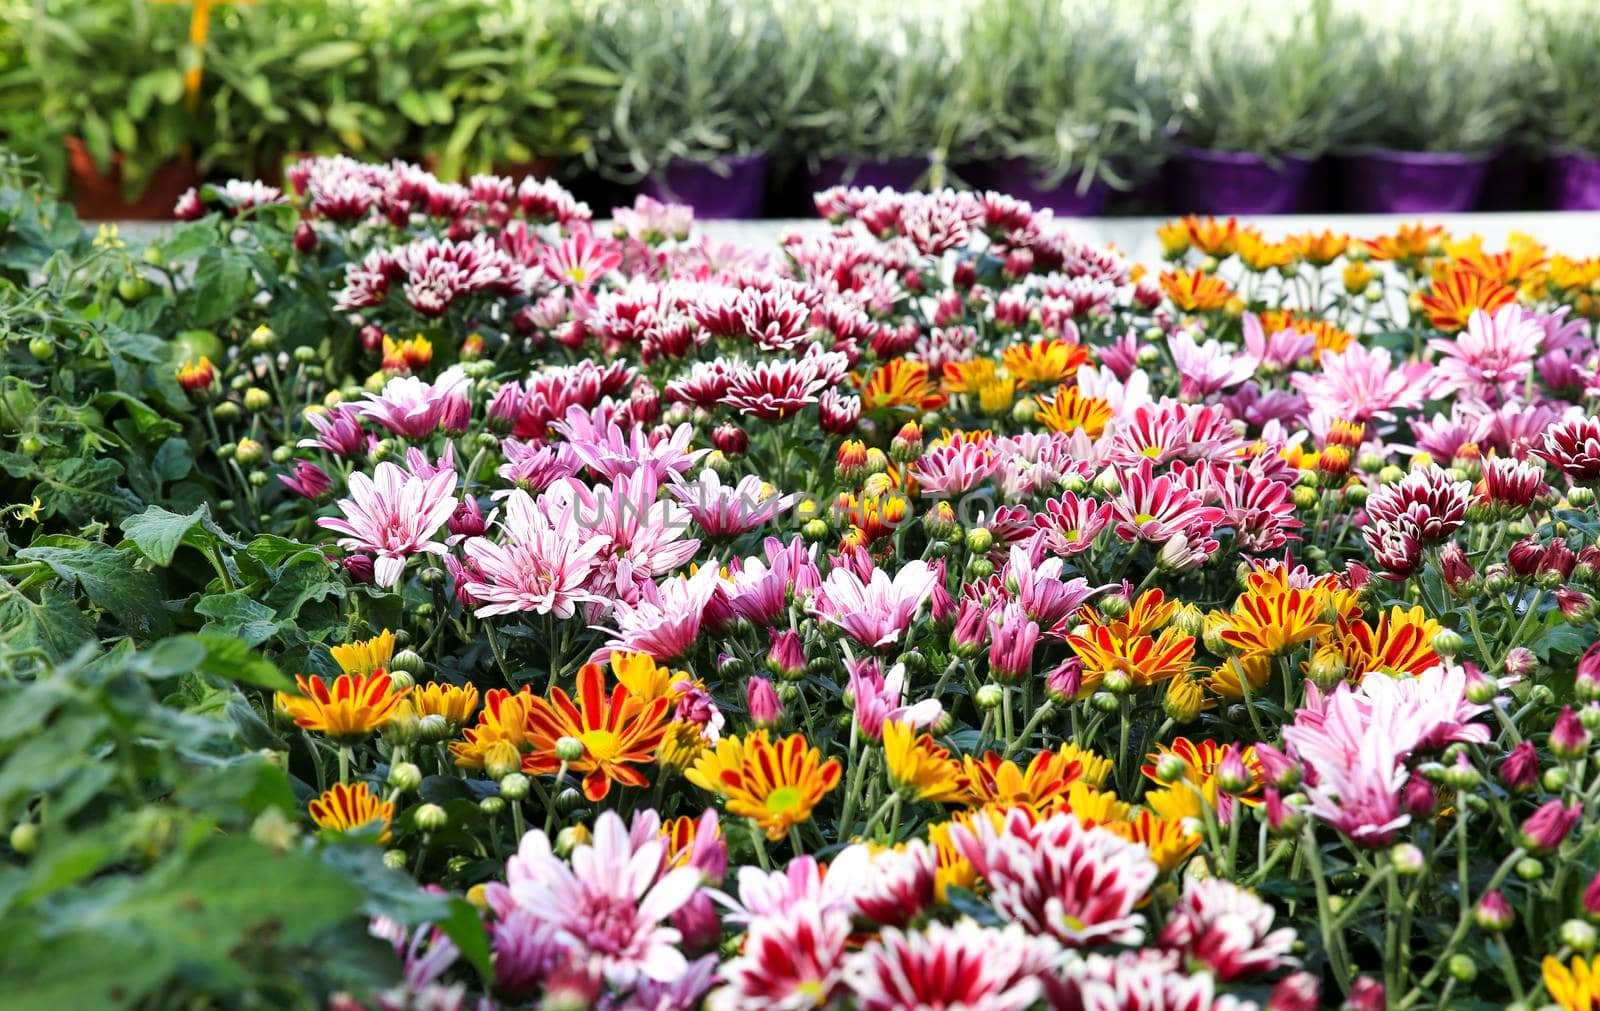 Colorful Chrysanthemum Indicum plants in the garden by soniabonet